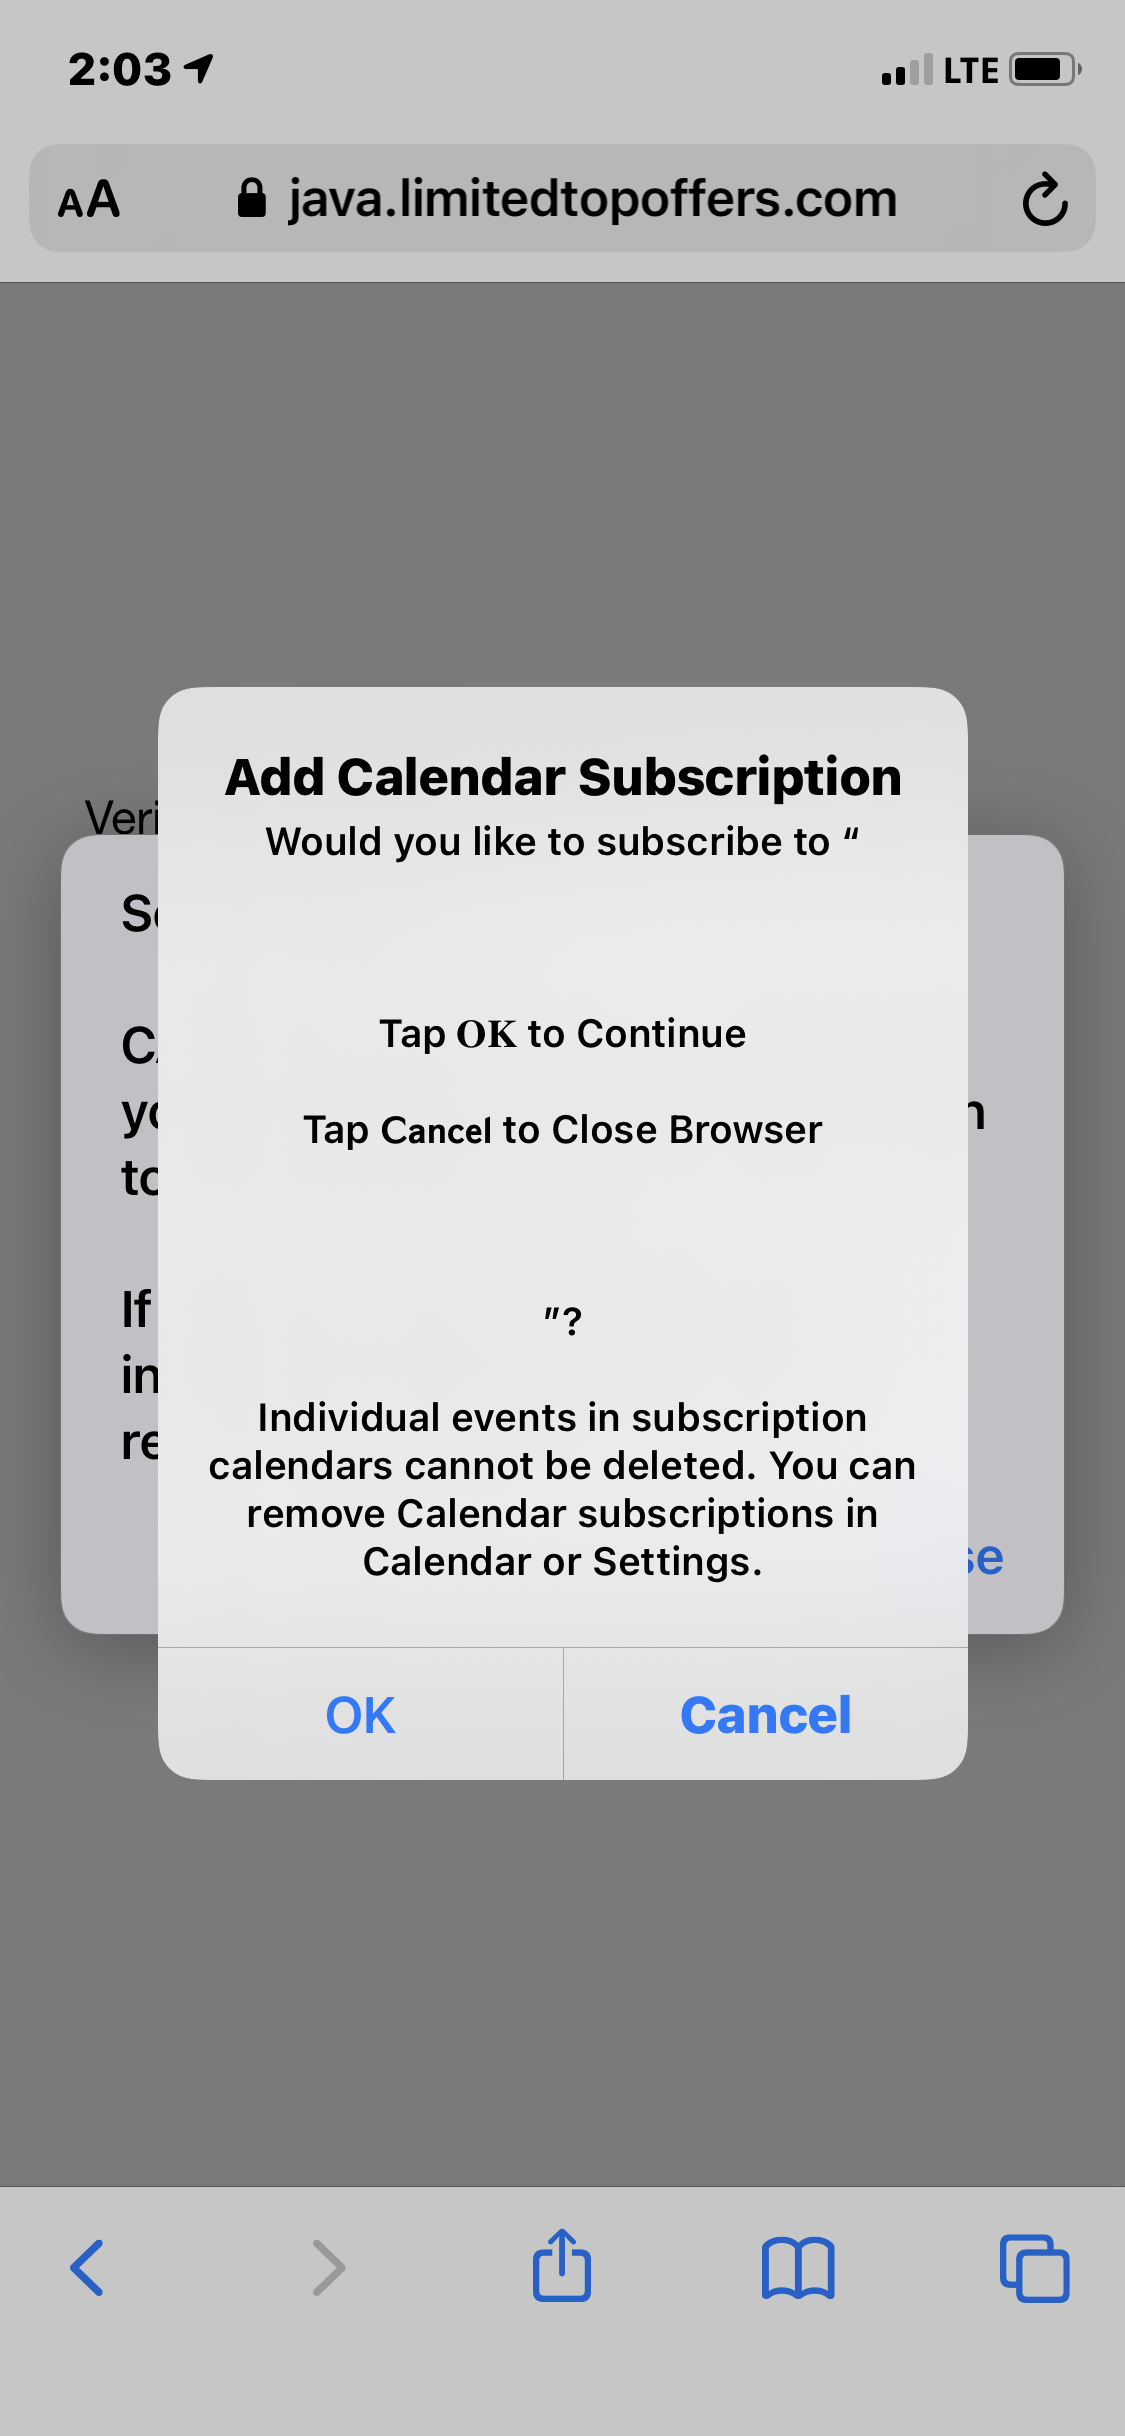 iOS alert to obtain consent to add the calendar